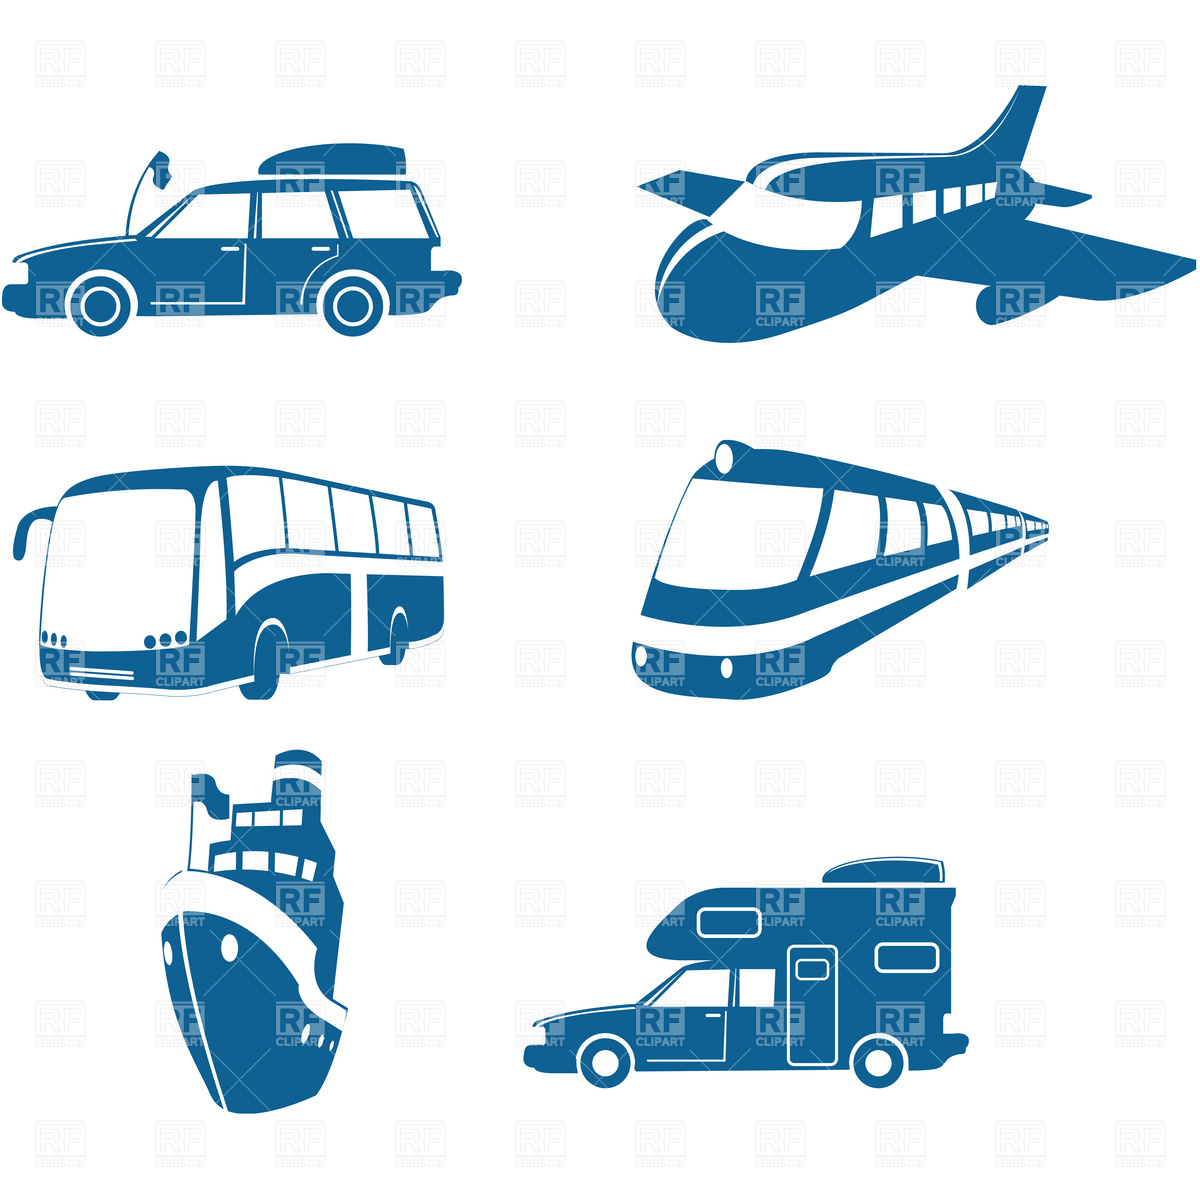 Vehicles 4604 Transportation Download Royalty Free Vector Clipart